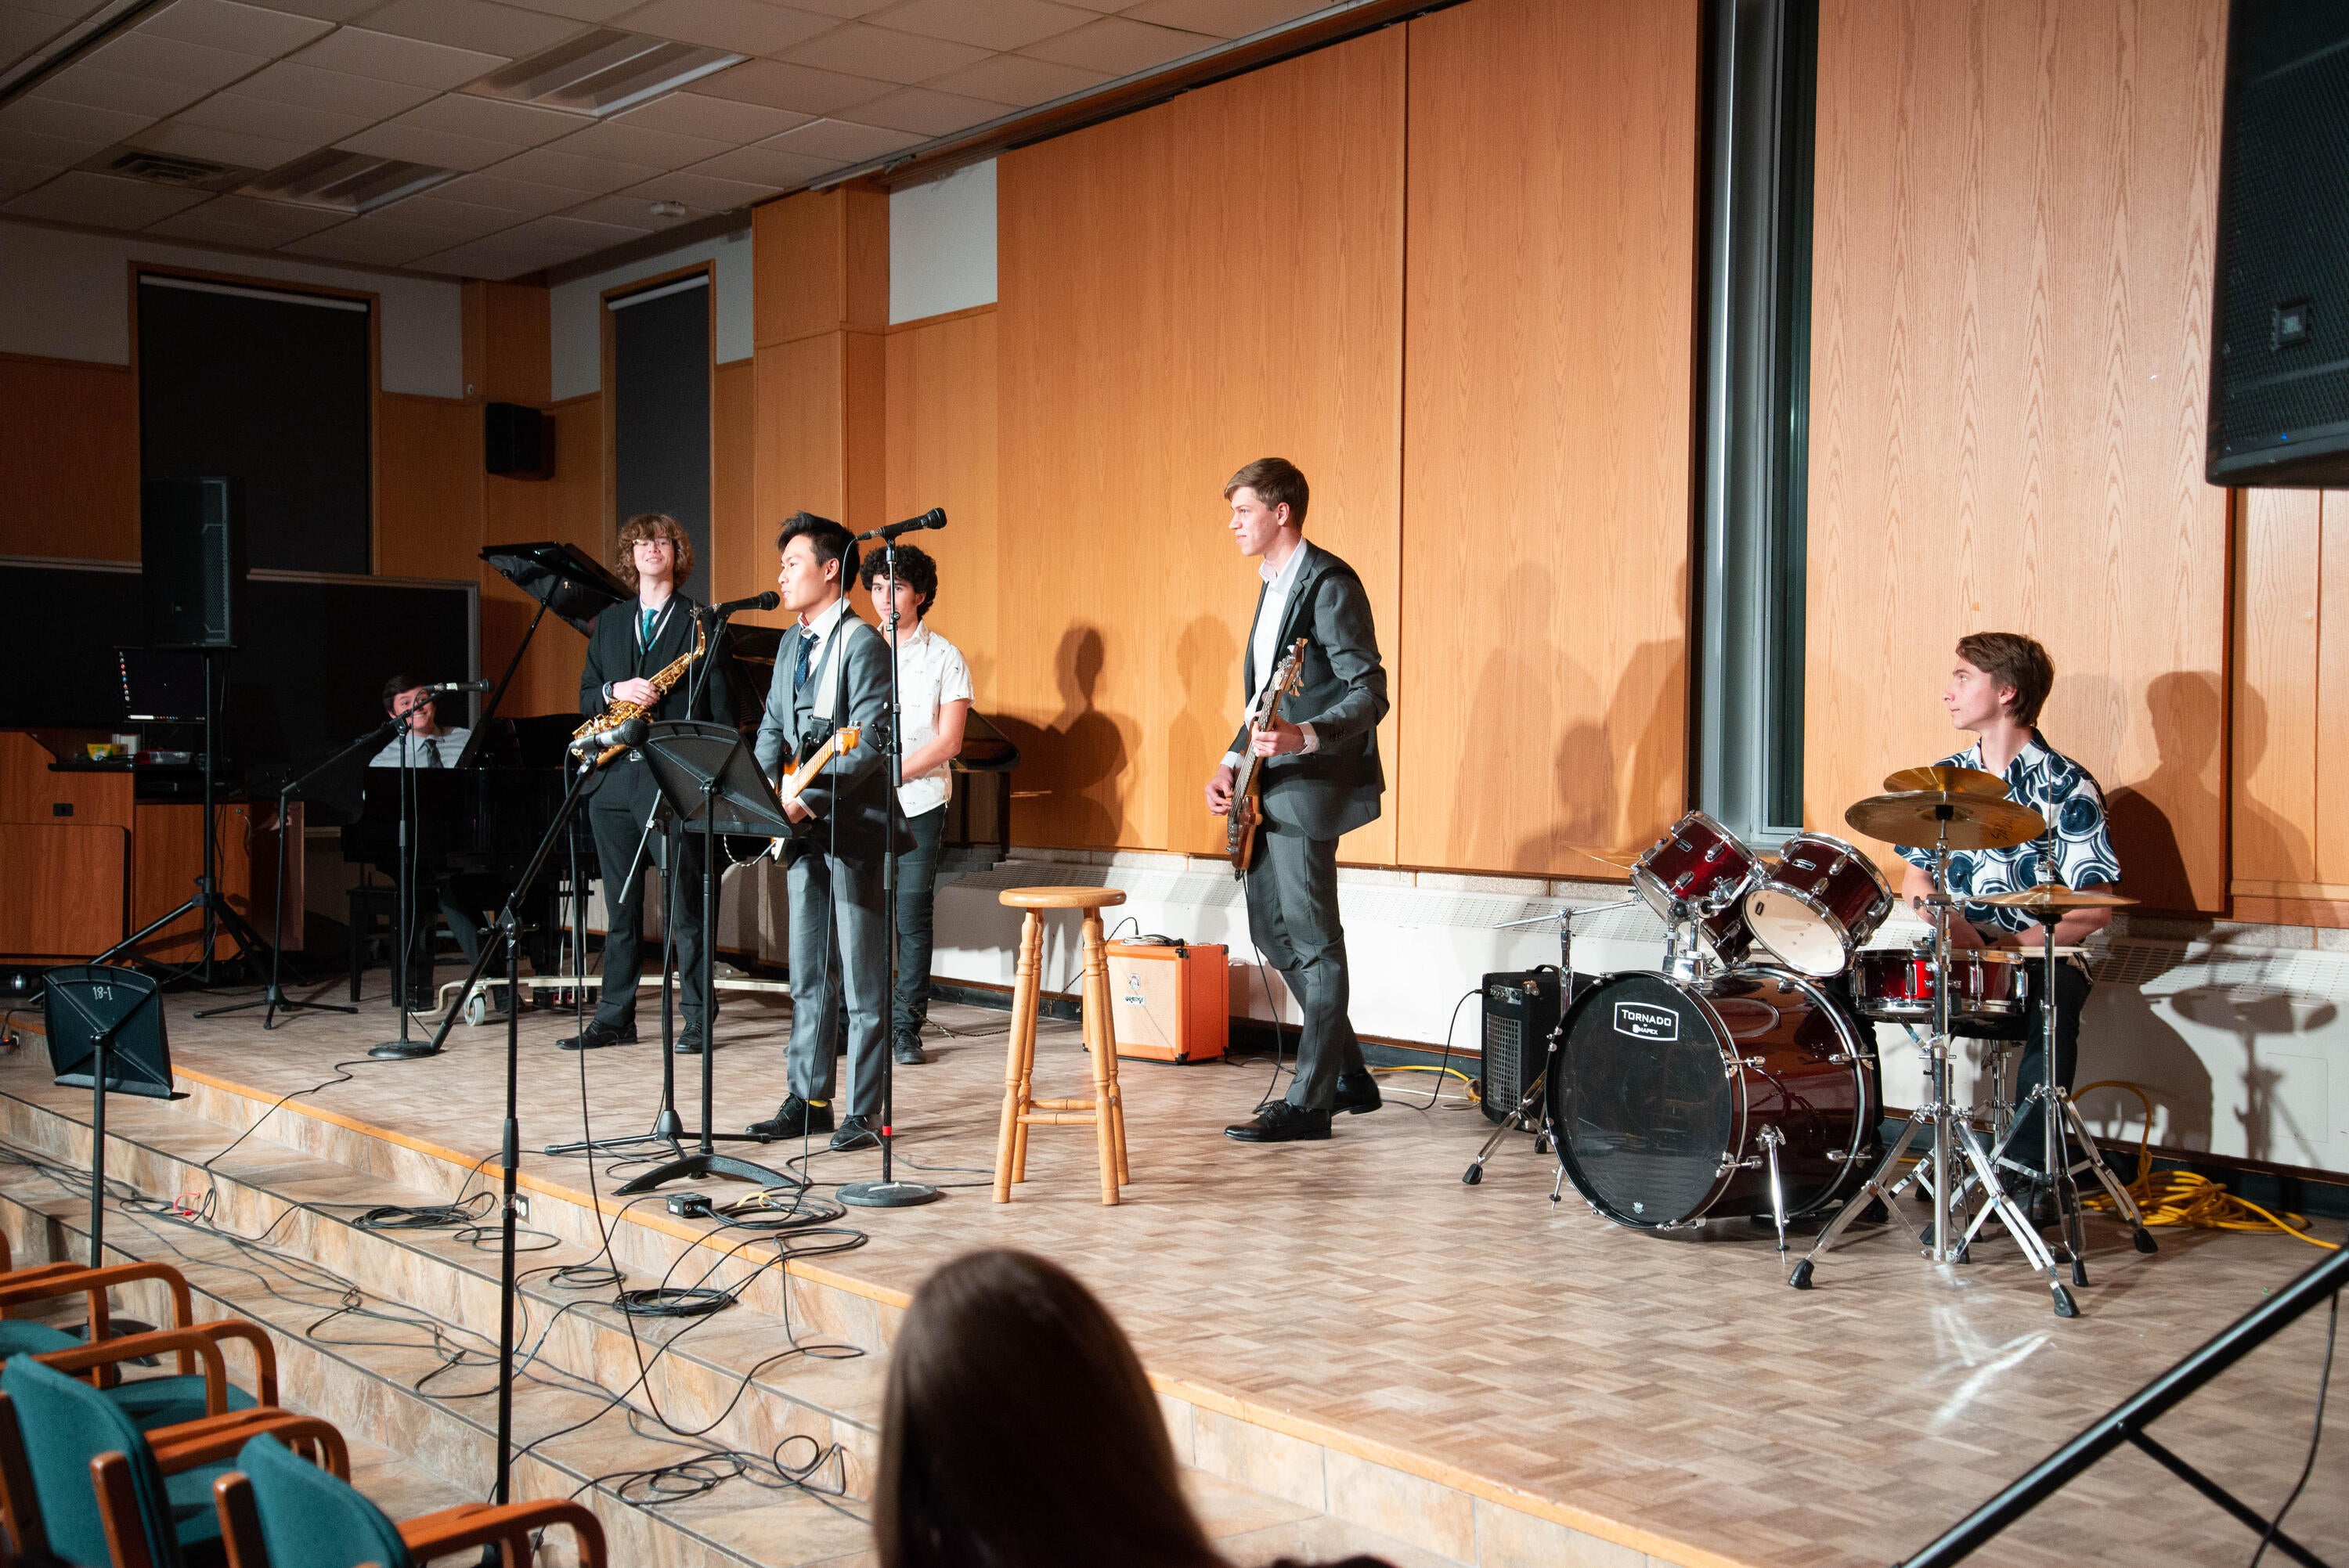 Matthew plays with a band during a grebel talent show